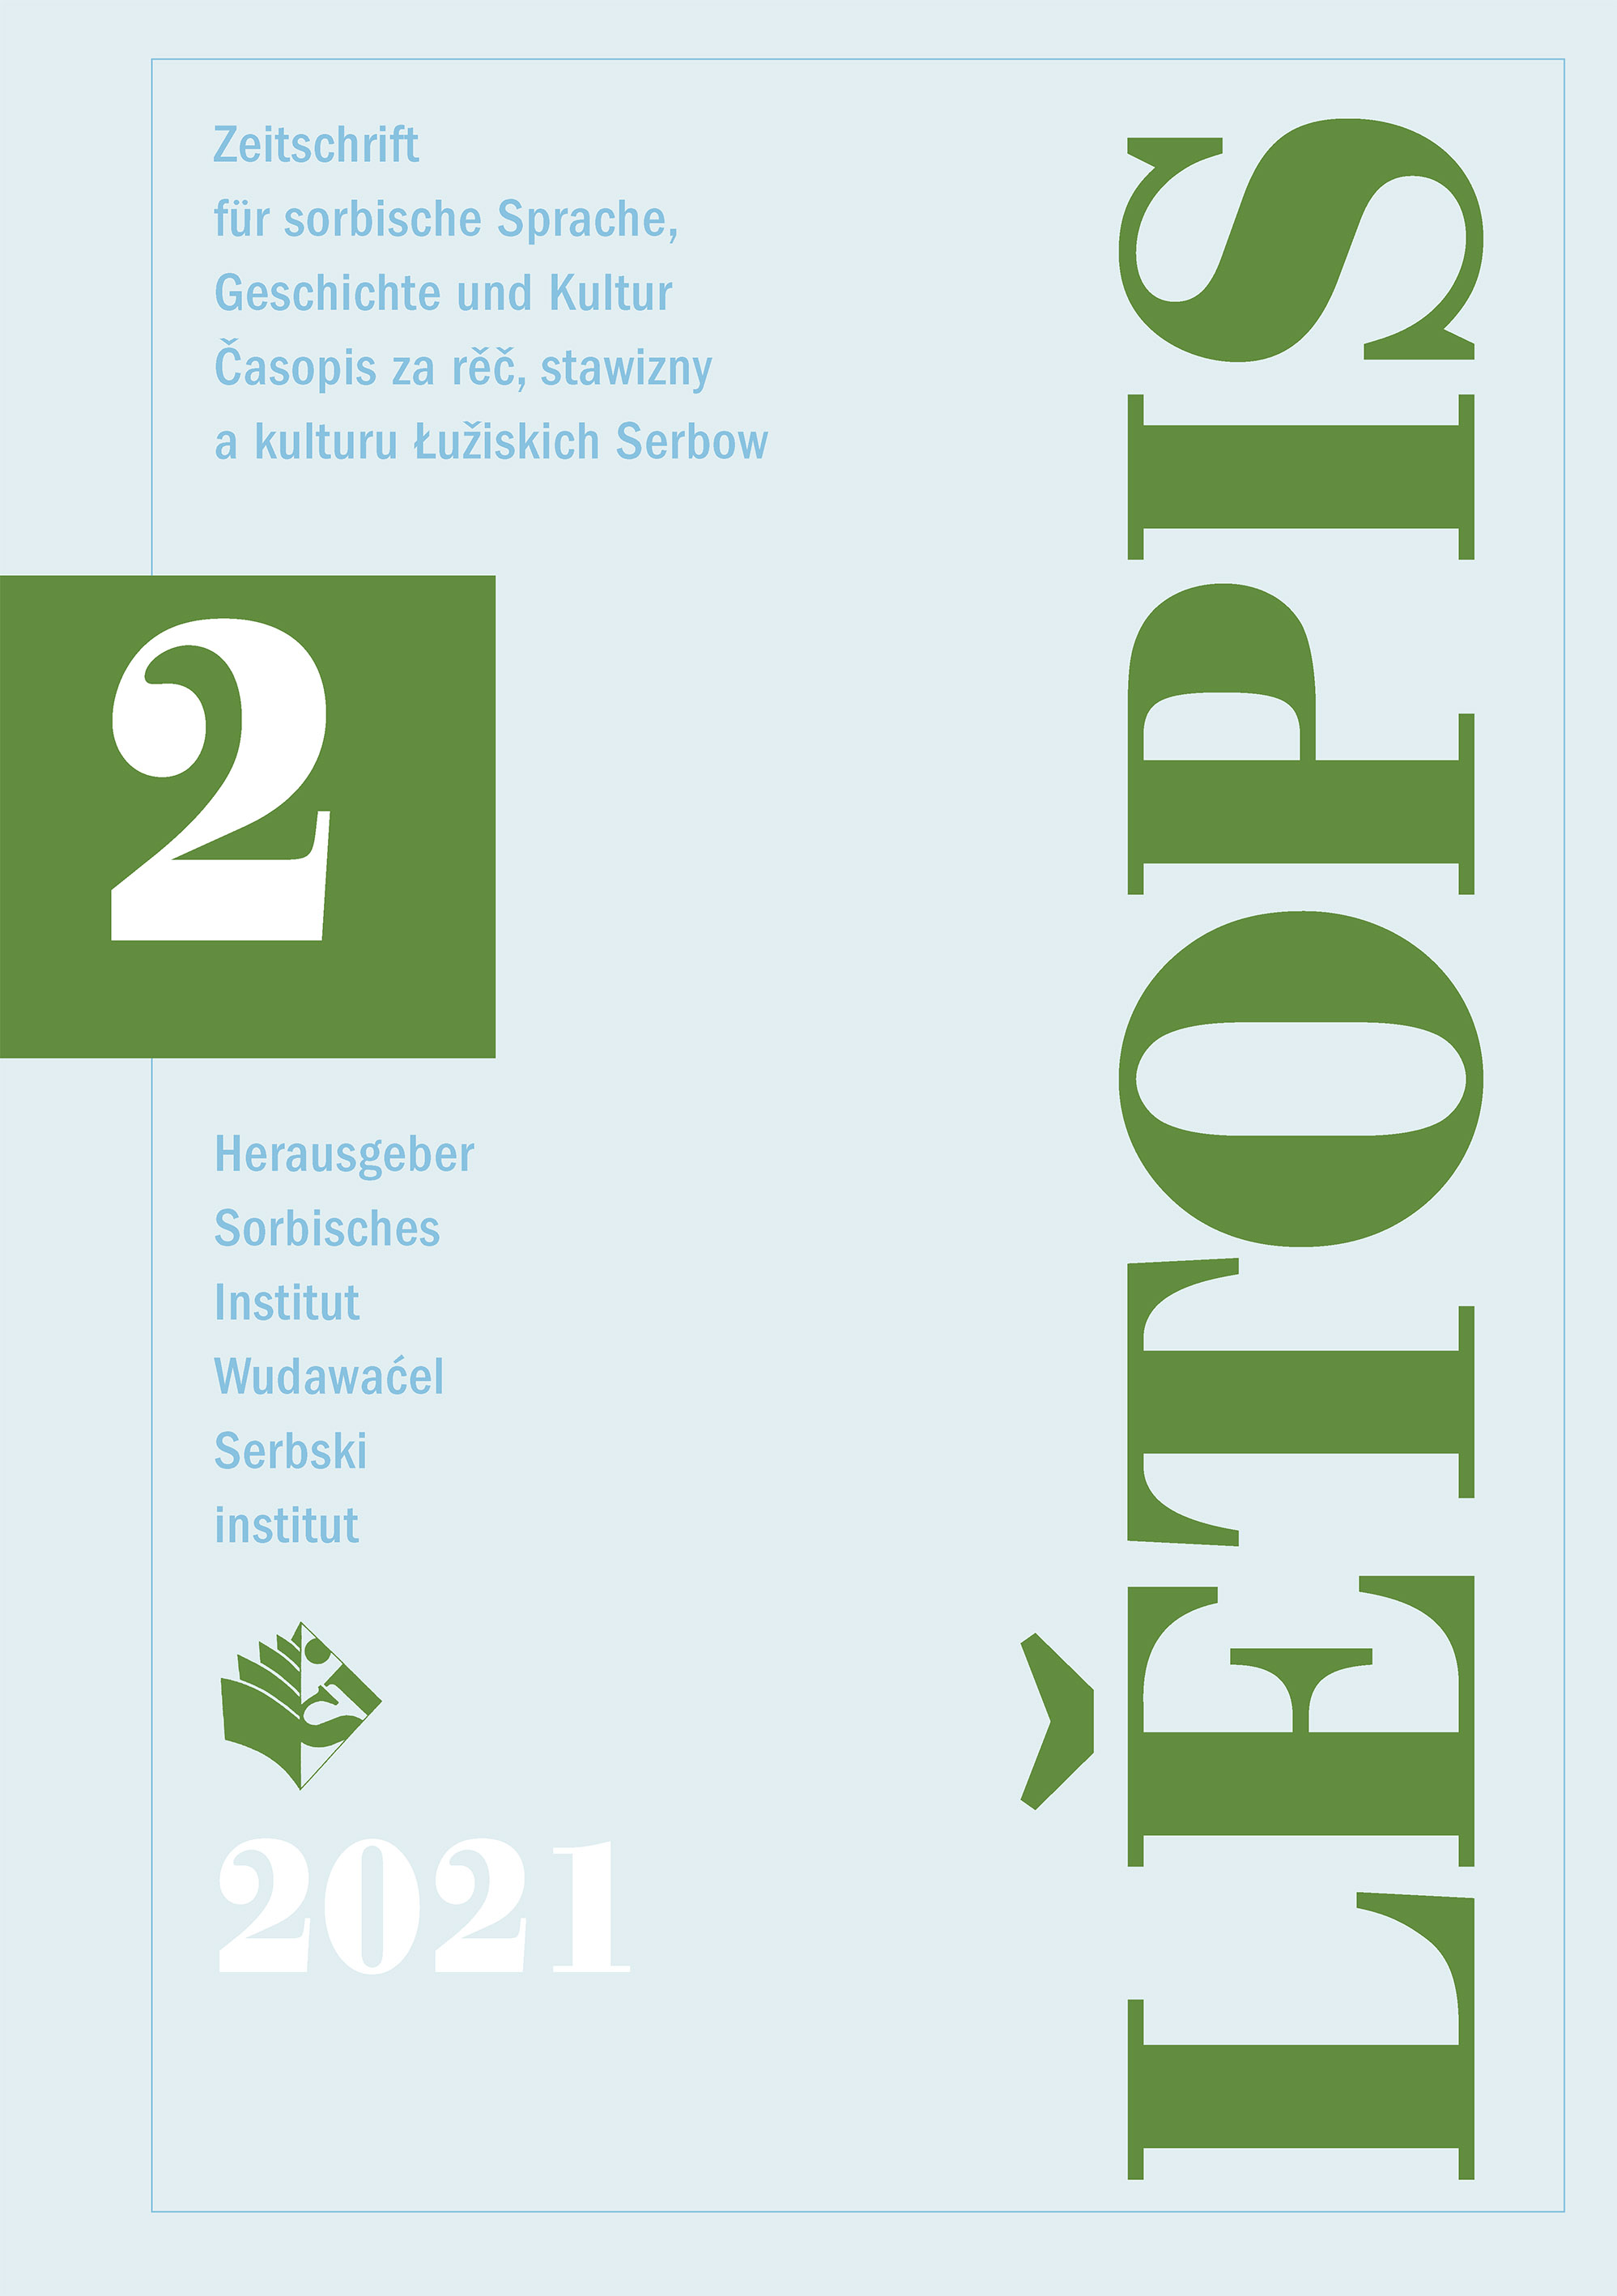 Third Meeting of the "Network of Young Sorabistic Academics", May 27th-29th 2021 in Bautzen Cover Image